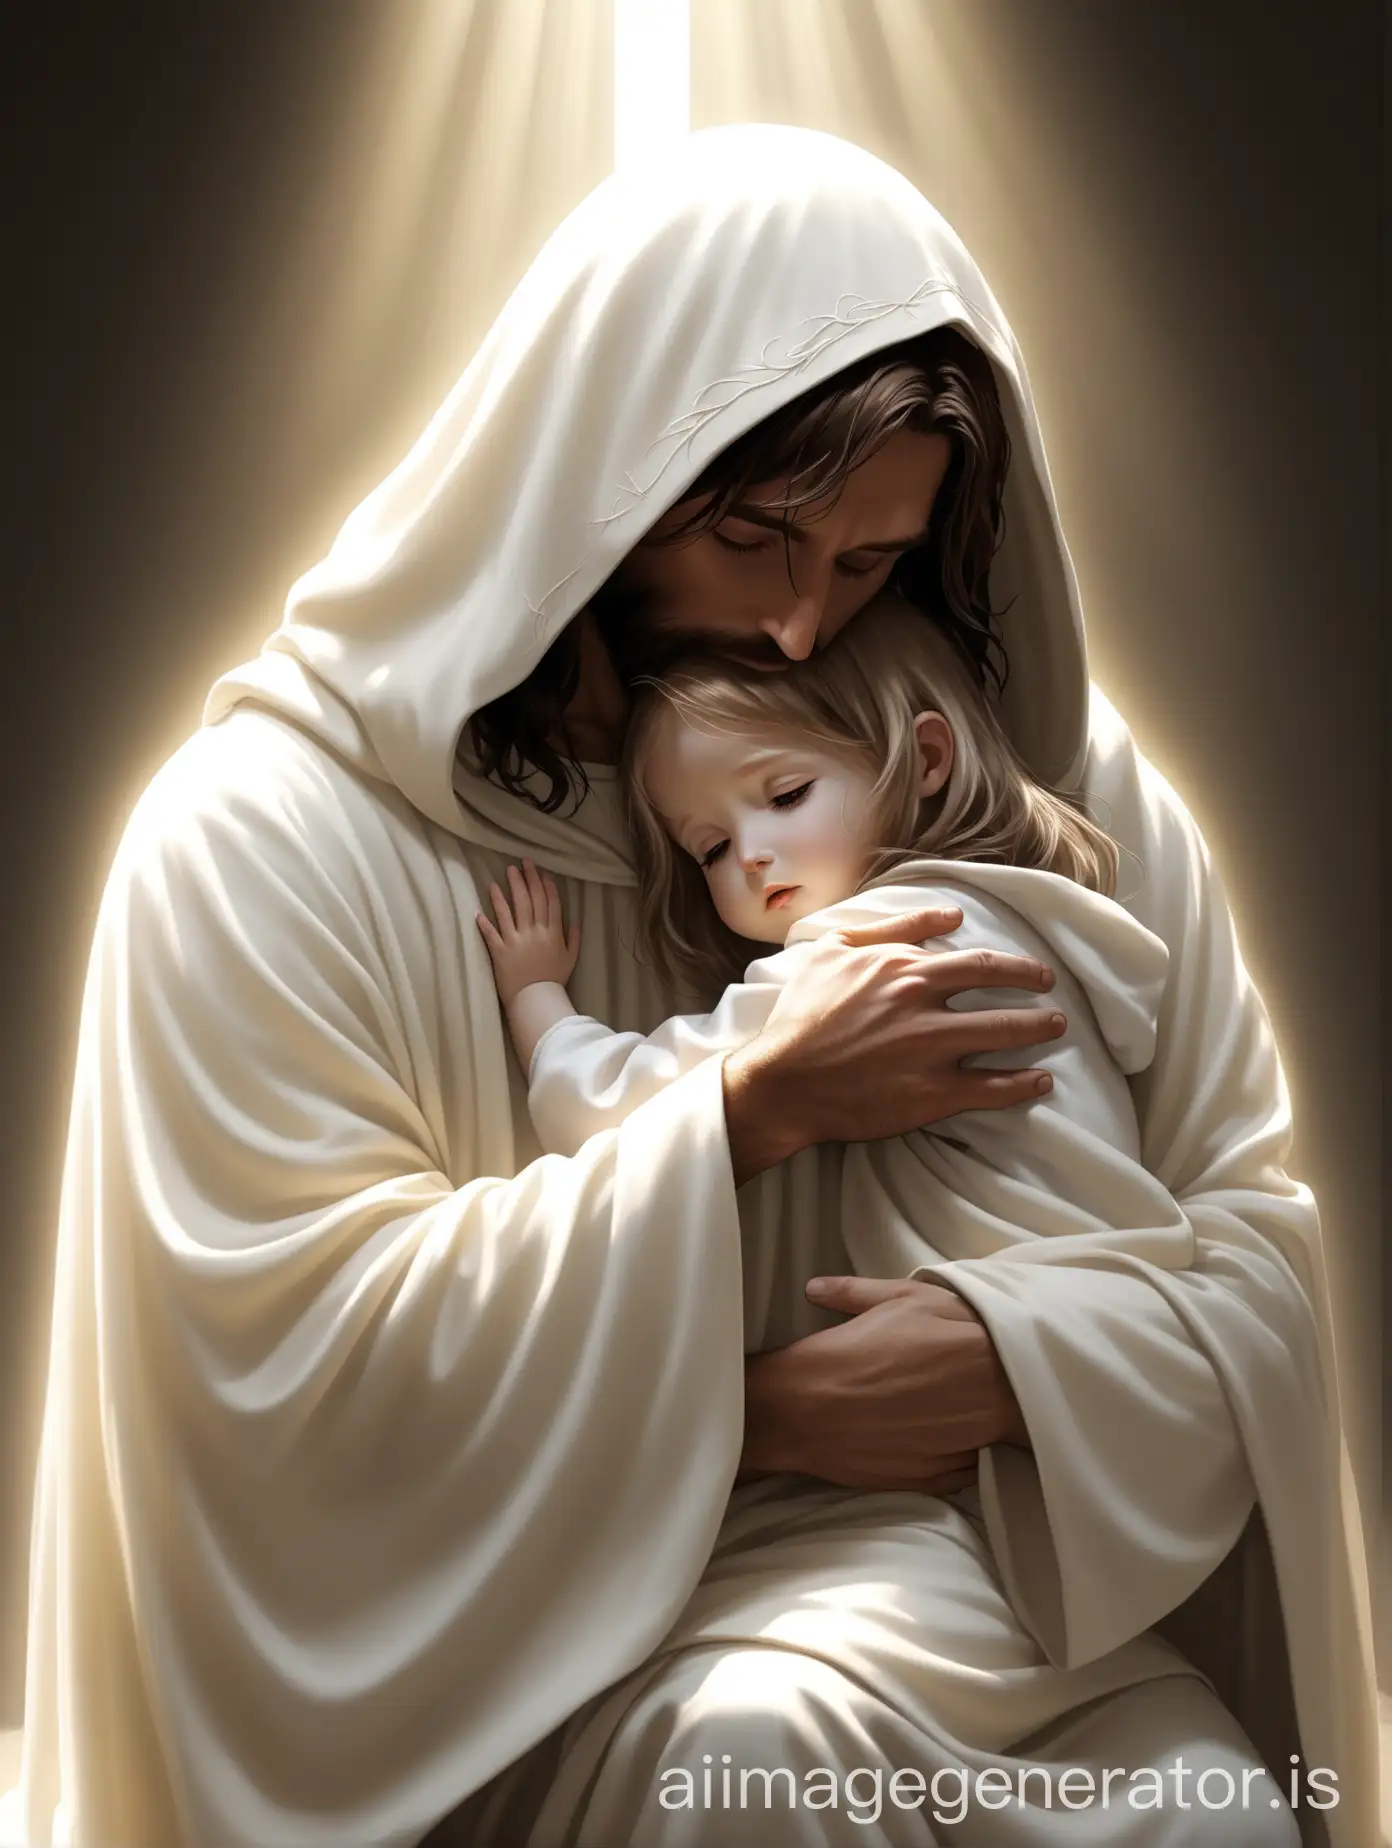 Jesus Christ kneeled down hugging a little girl. The little girl is resting in Jesus arms and Jesus Christ is wearing a white hood that covers his face and only allows the viewer to see his hair and light coming out of the hood